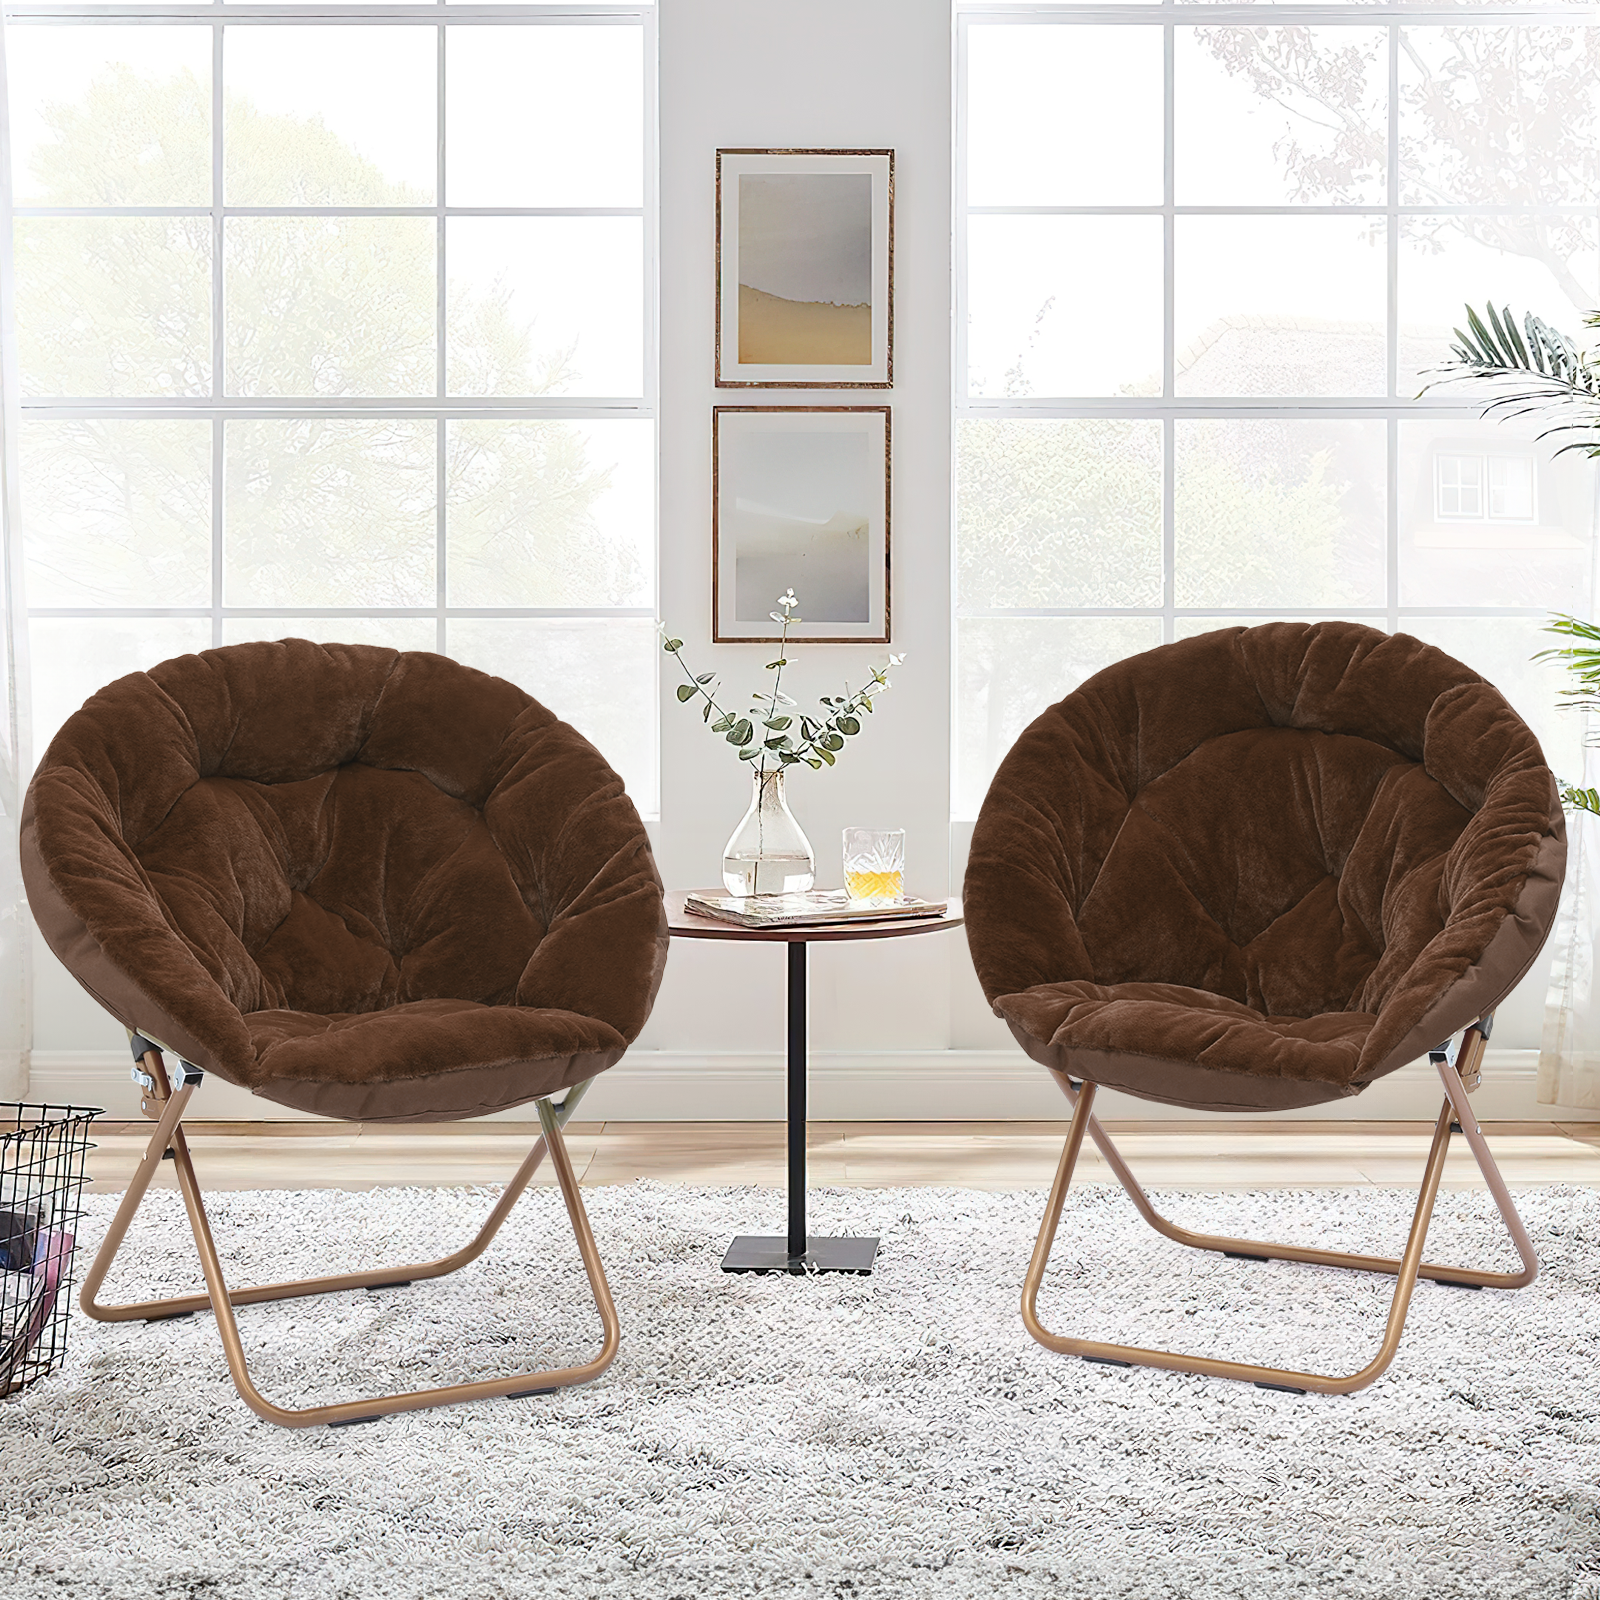 Magshion 2-Piece Folding Lounge Chair Comfy Faux Fur Saucer Chair, Cozy Moon Chair Seating with Metal Frame for Home Living Room Bedroom, Brown - image 3 of 10